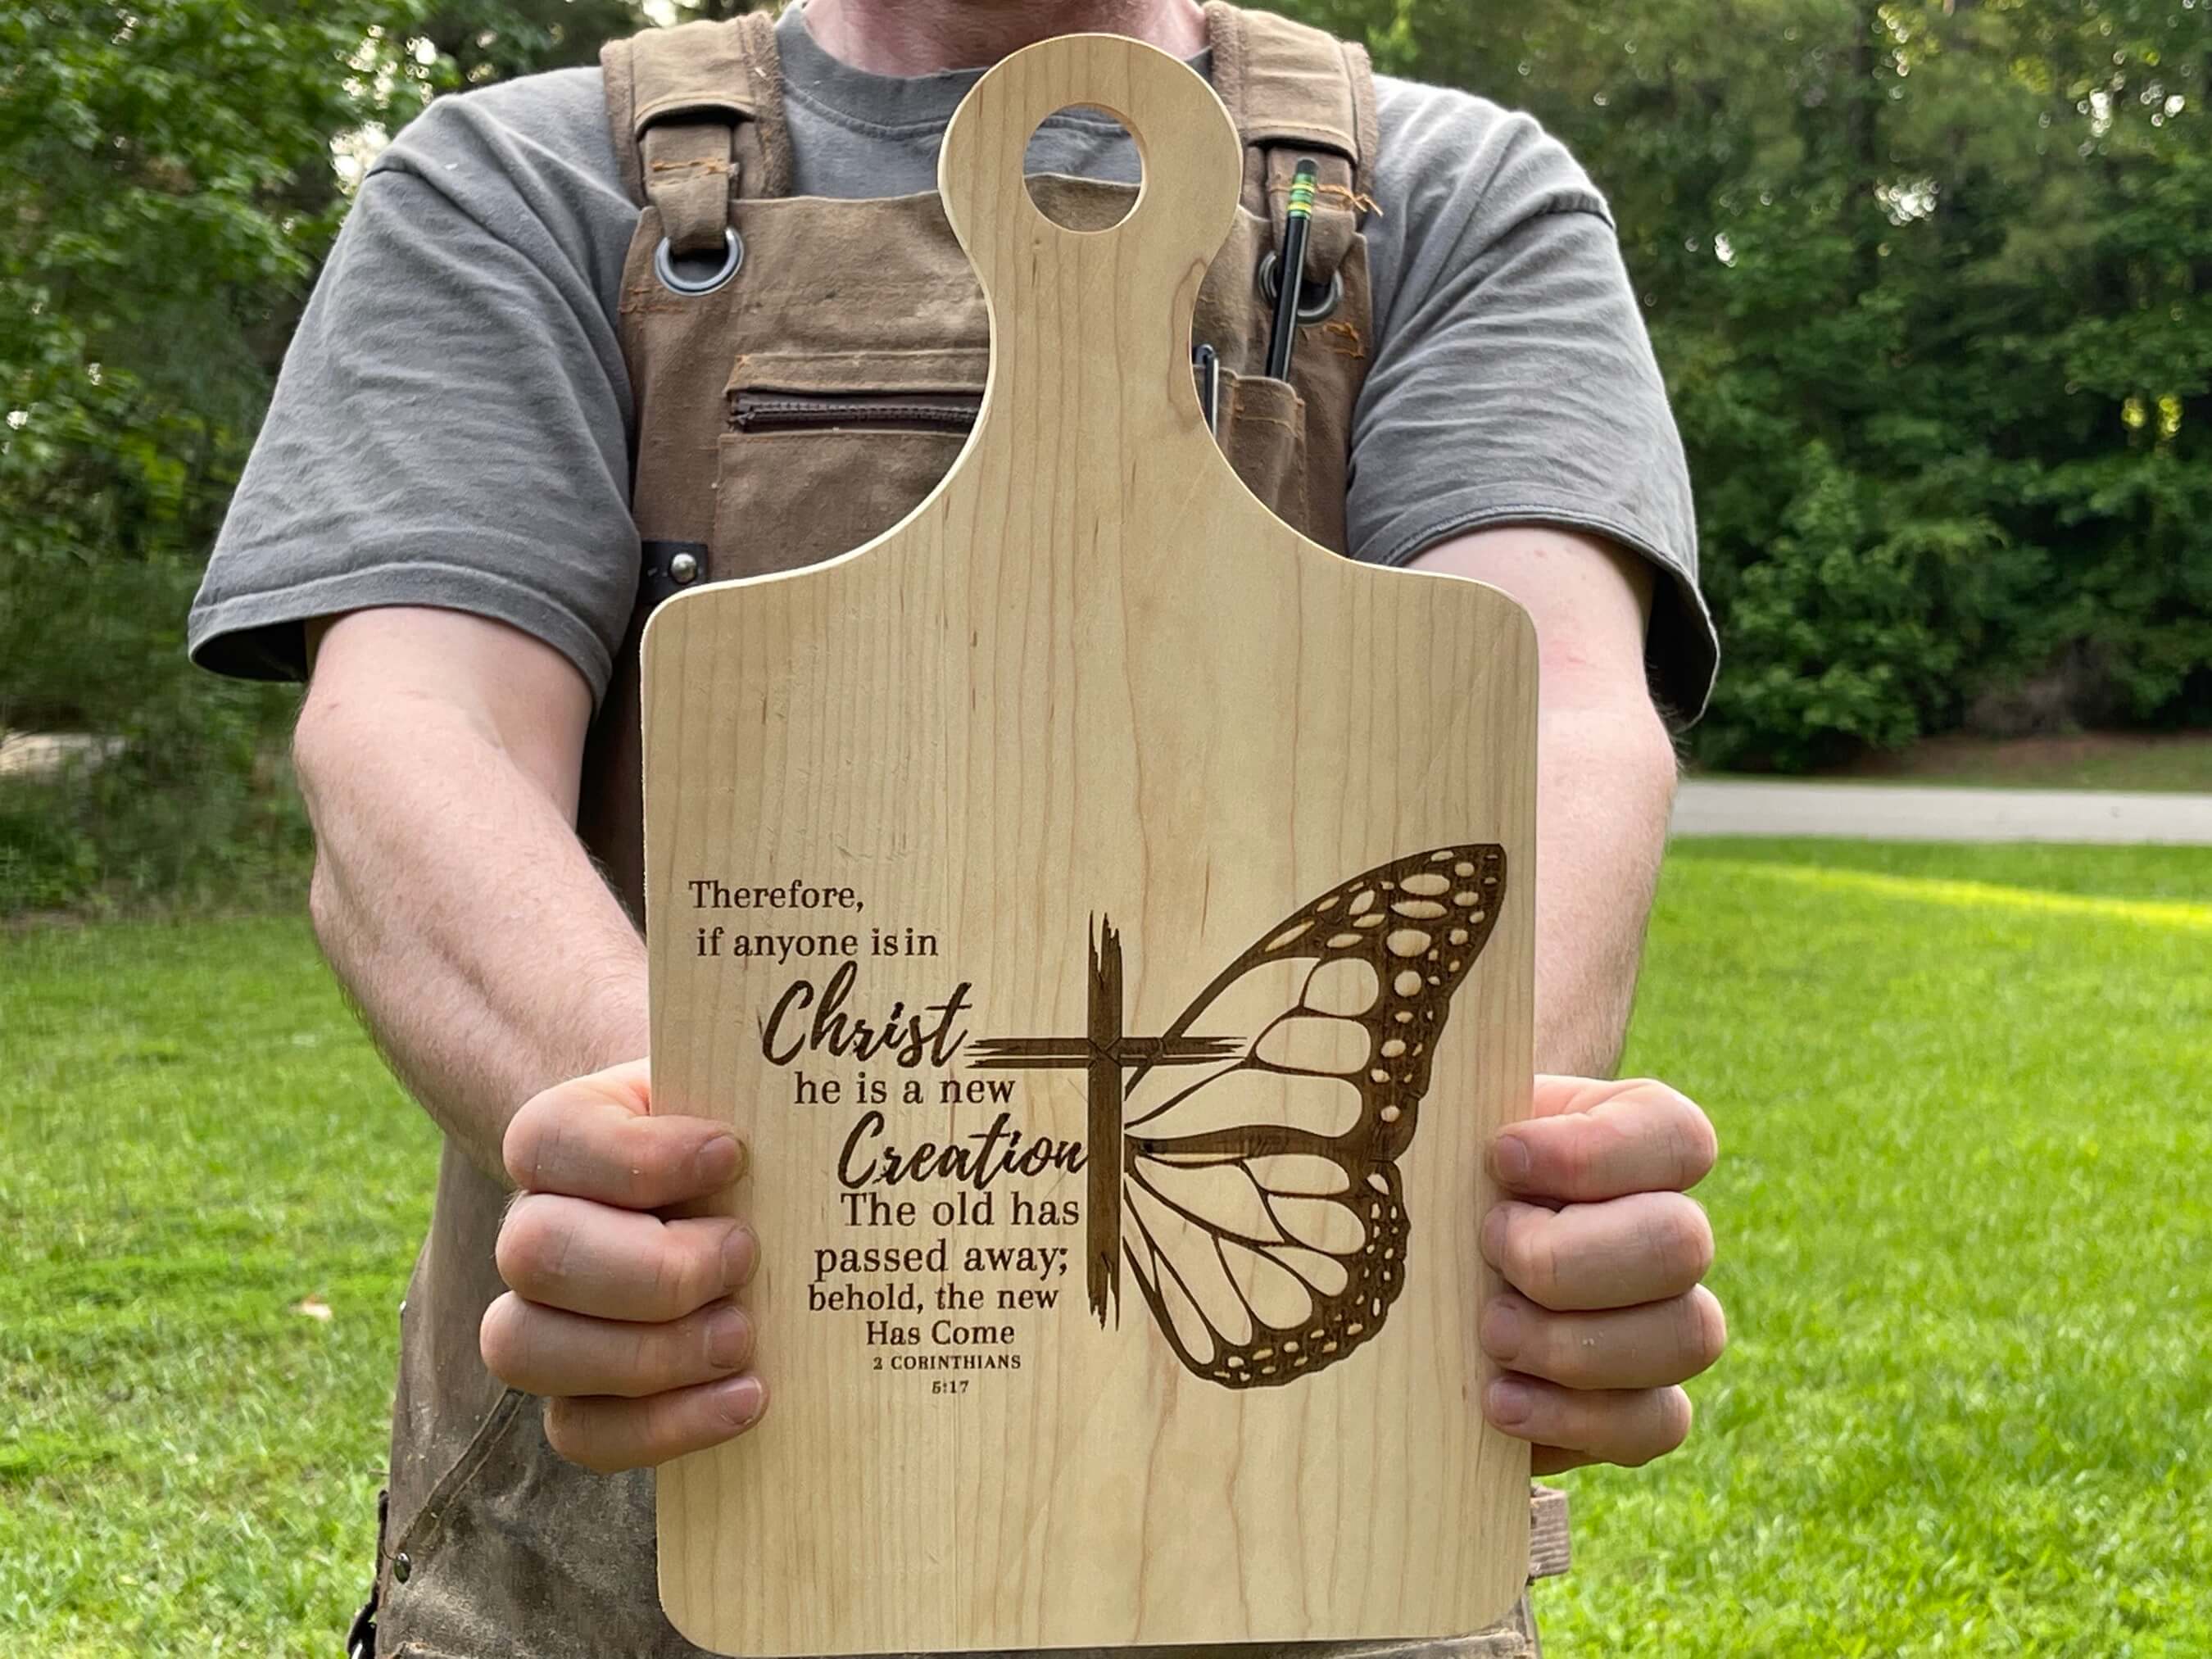 Closer view of the Christian cheese board. The cutting board is shown being held by someone outside. On the board is the bible verse 2 Corinthians 5:17. See more at SawyerCustomCrafts.com